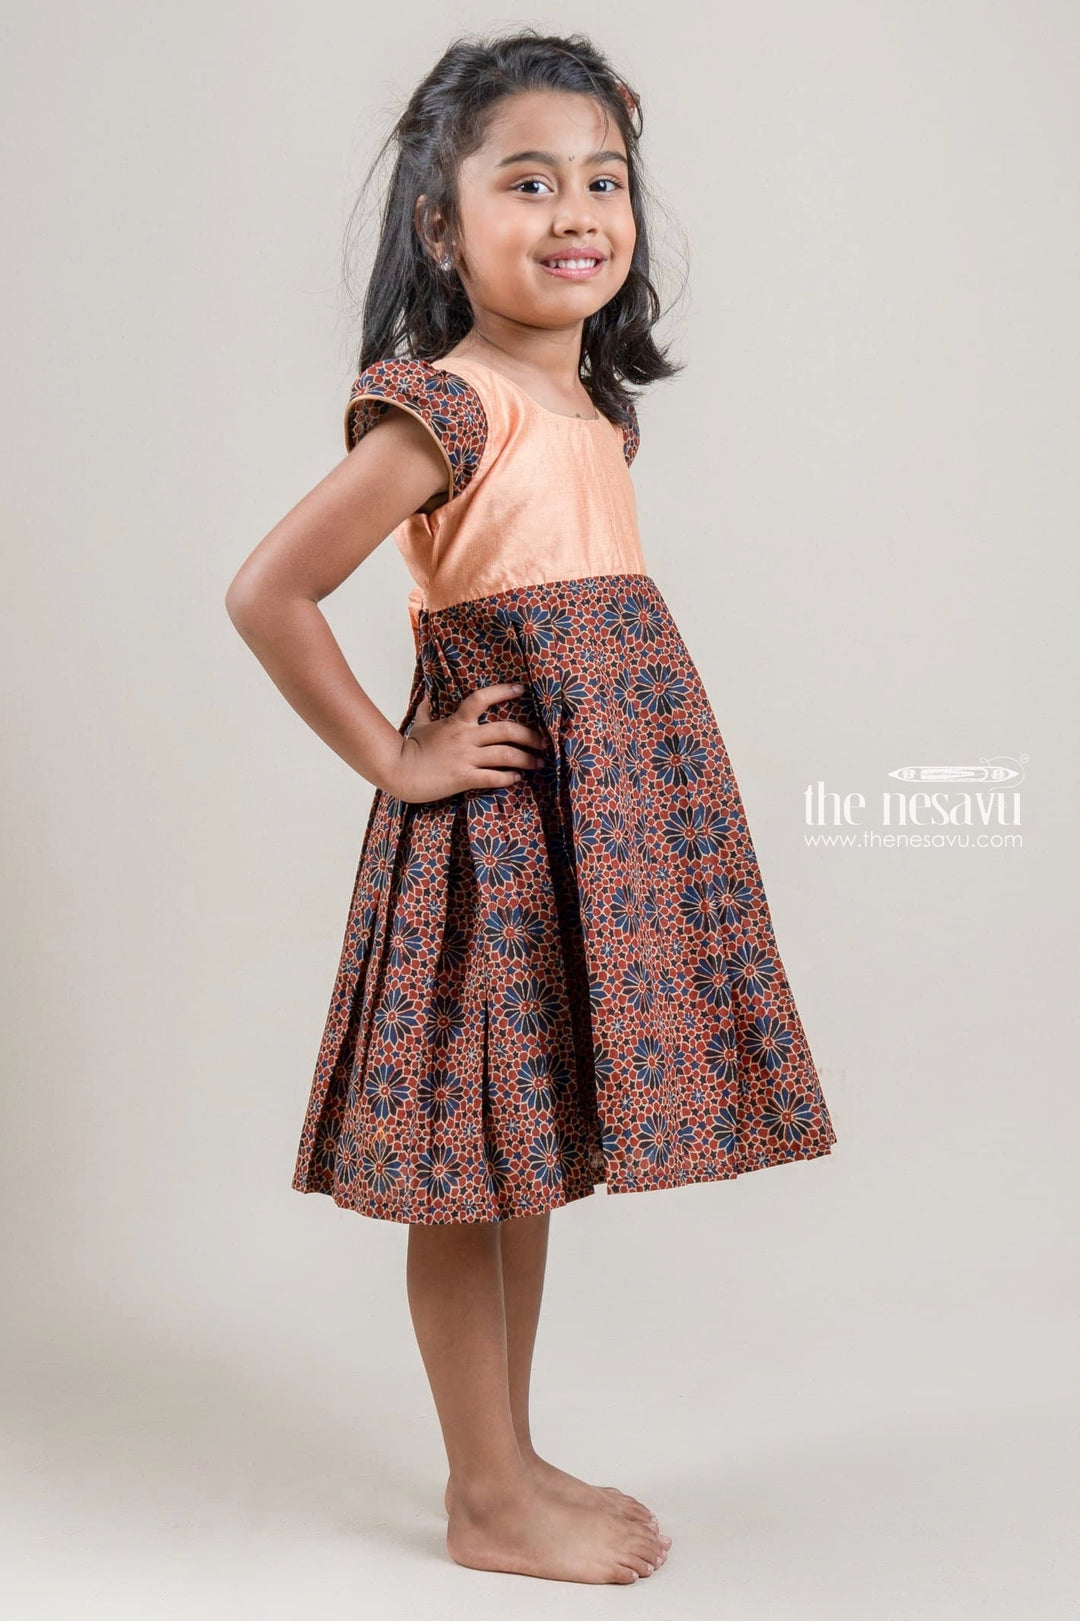 The Nesavu Girls Cotton Frock Simple Soft Cotton Printed Frock With Contrasting Yoke For Baby Girls Nesavu Girls Play Wear Collection Online | Summer Cotton Frocks | The Nesavu